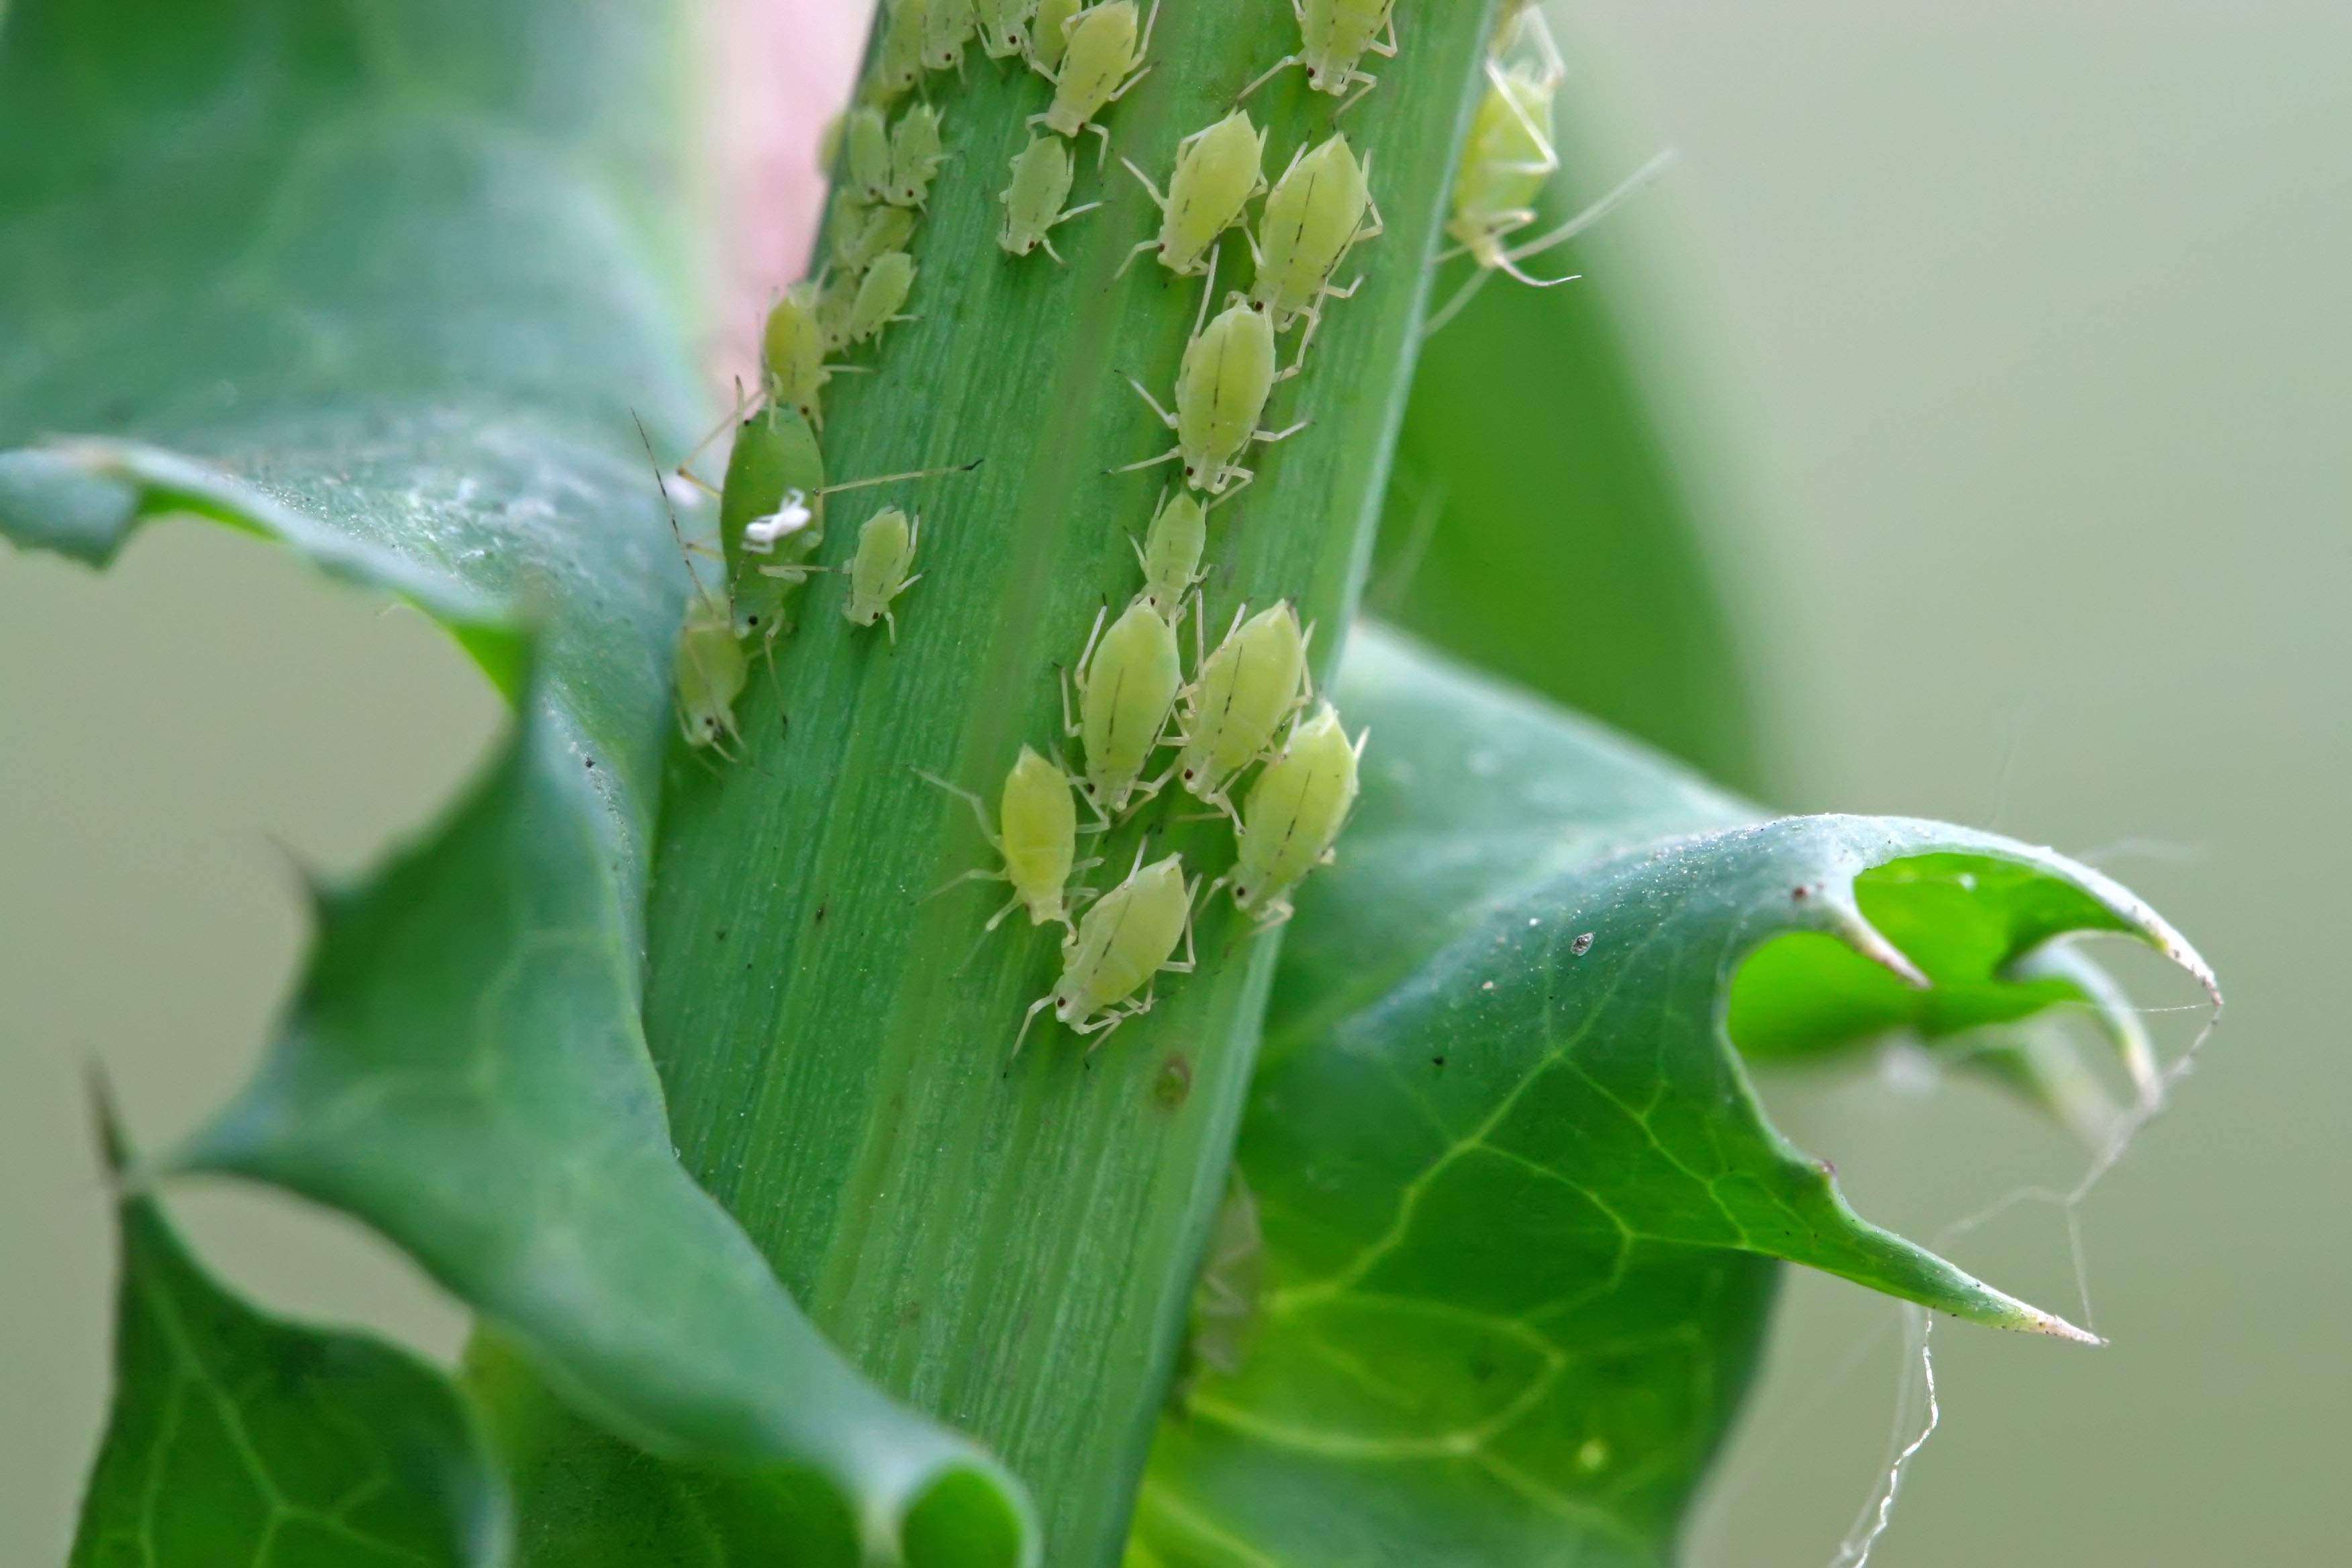 Aphids of various life stages on an unidentified green plant stem.